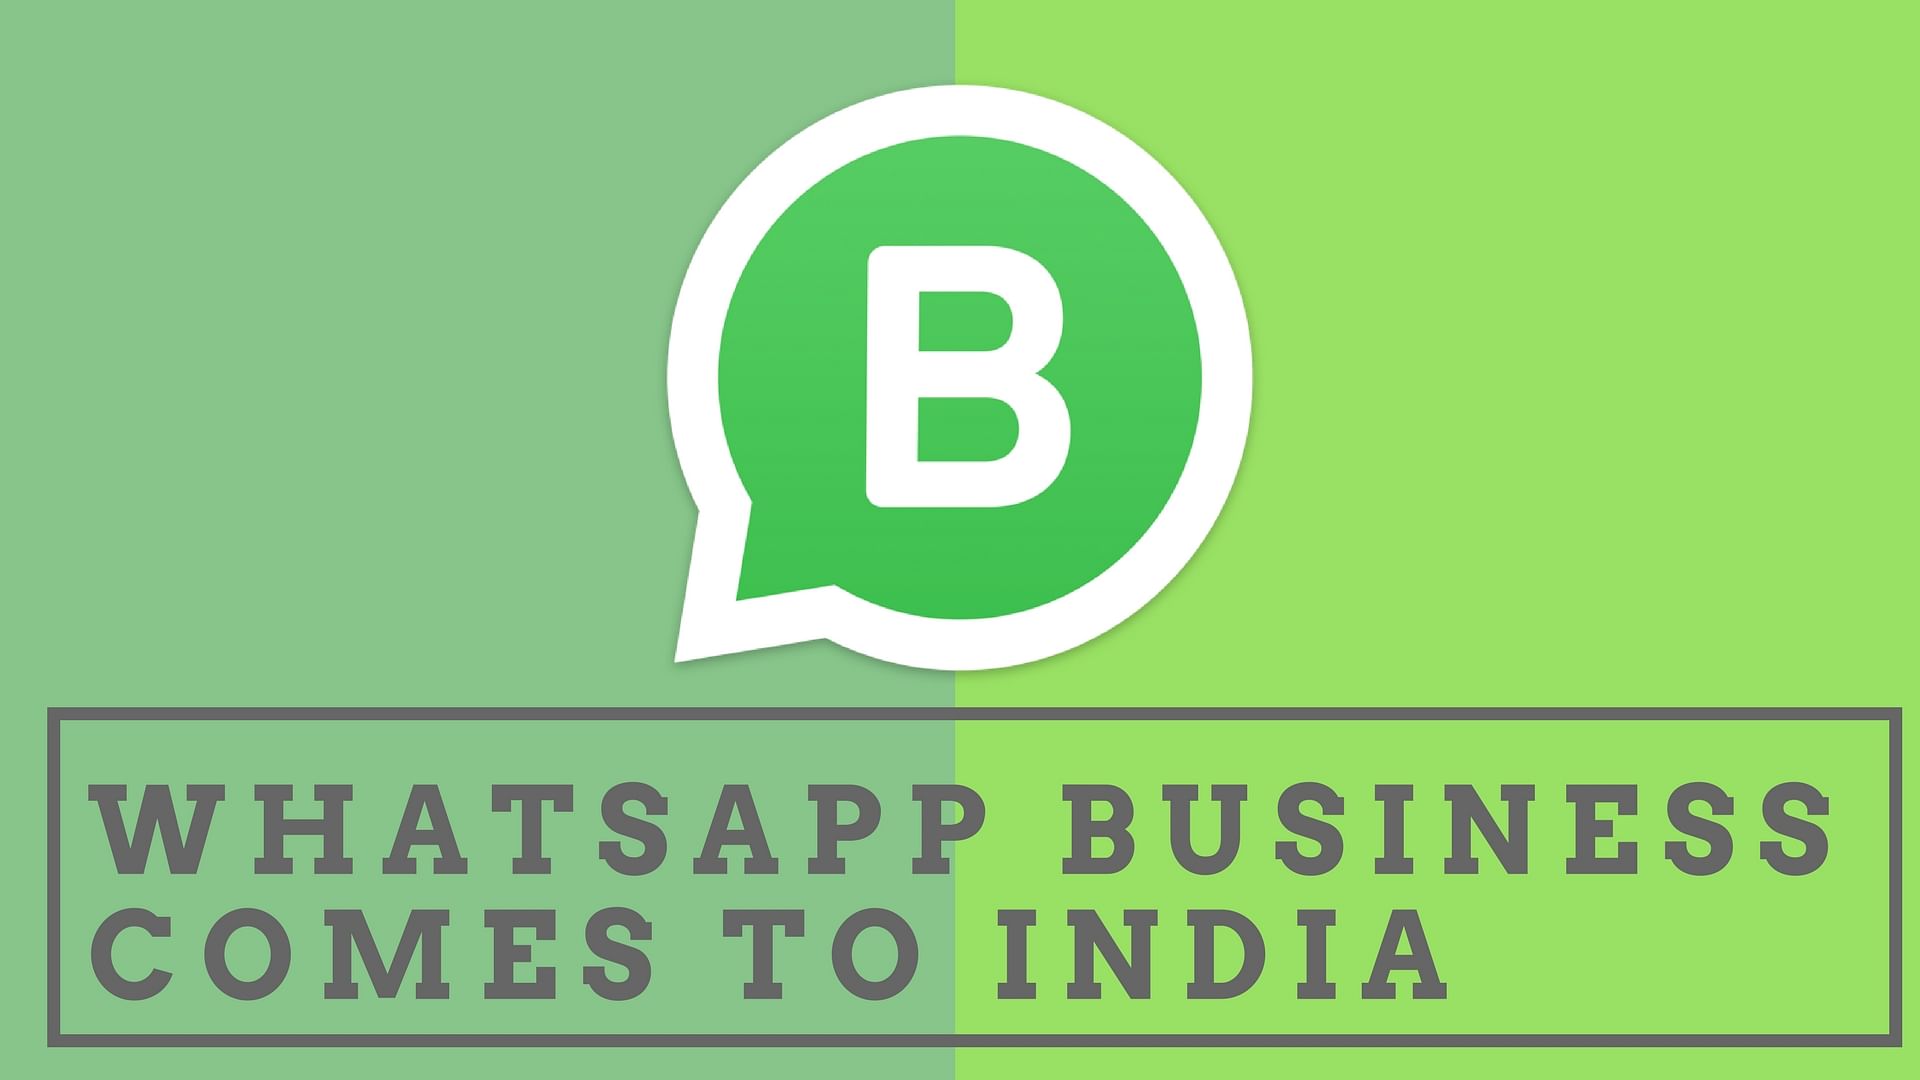 WhatsApp is reaching out to majority of SMBs with this app.&nbsp;